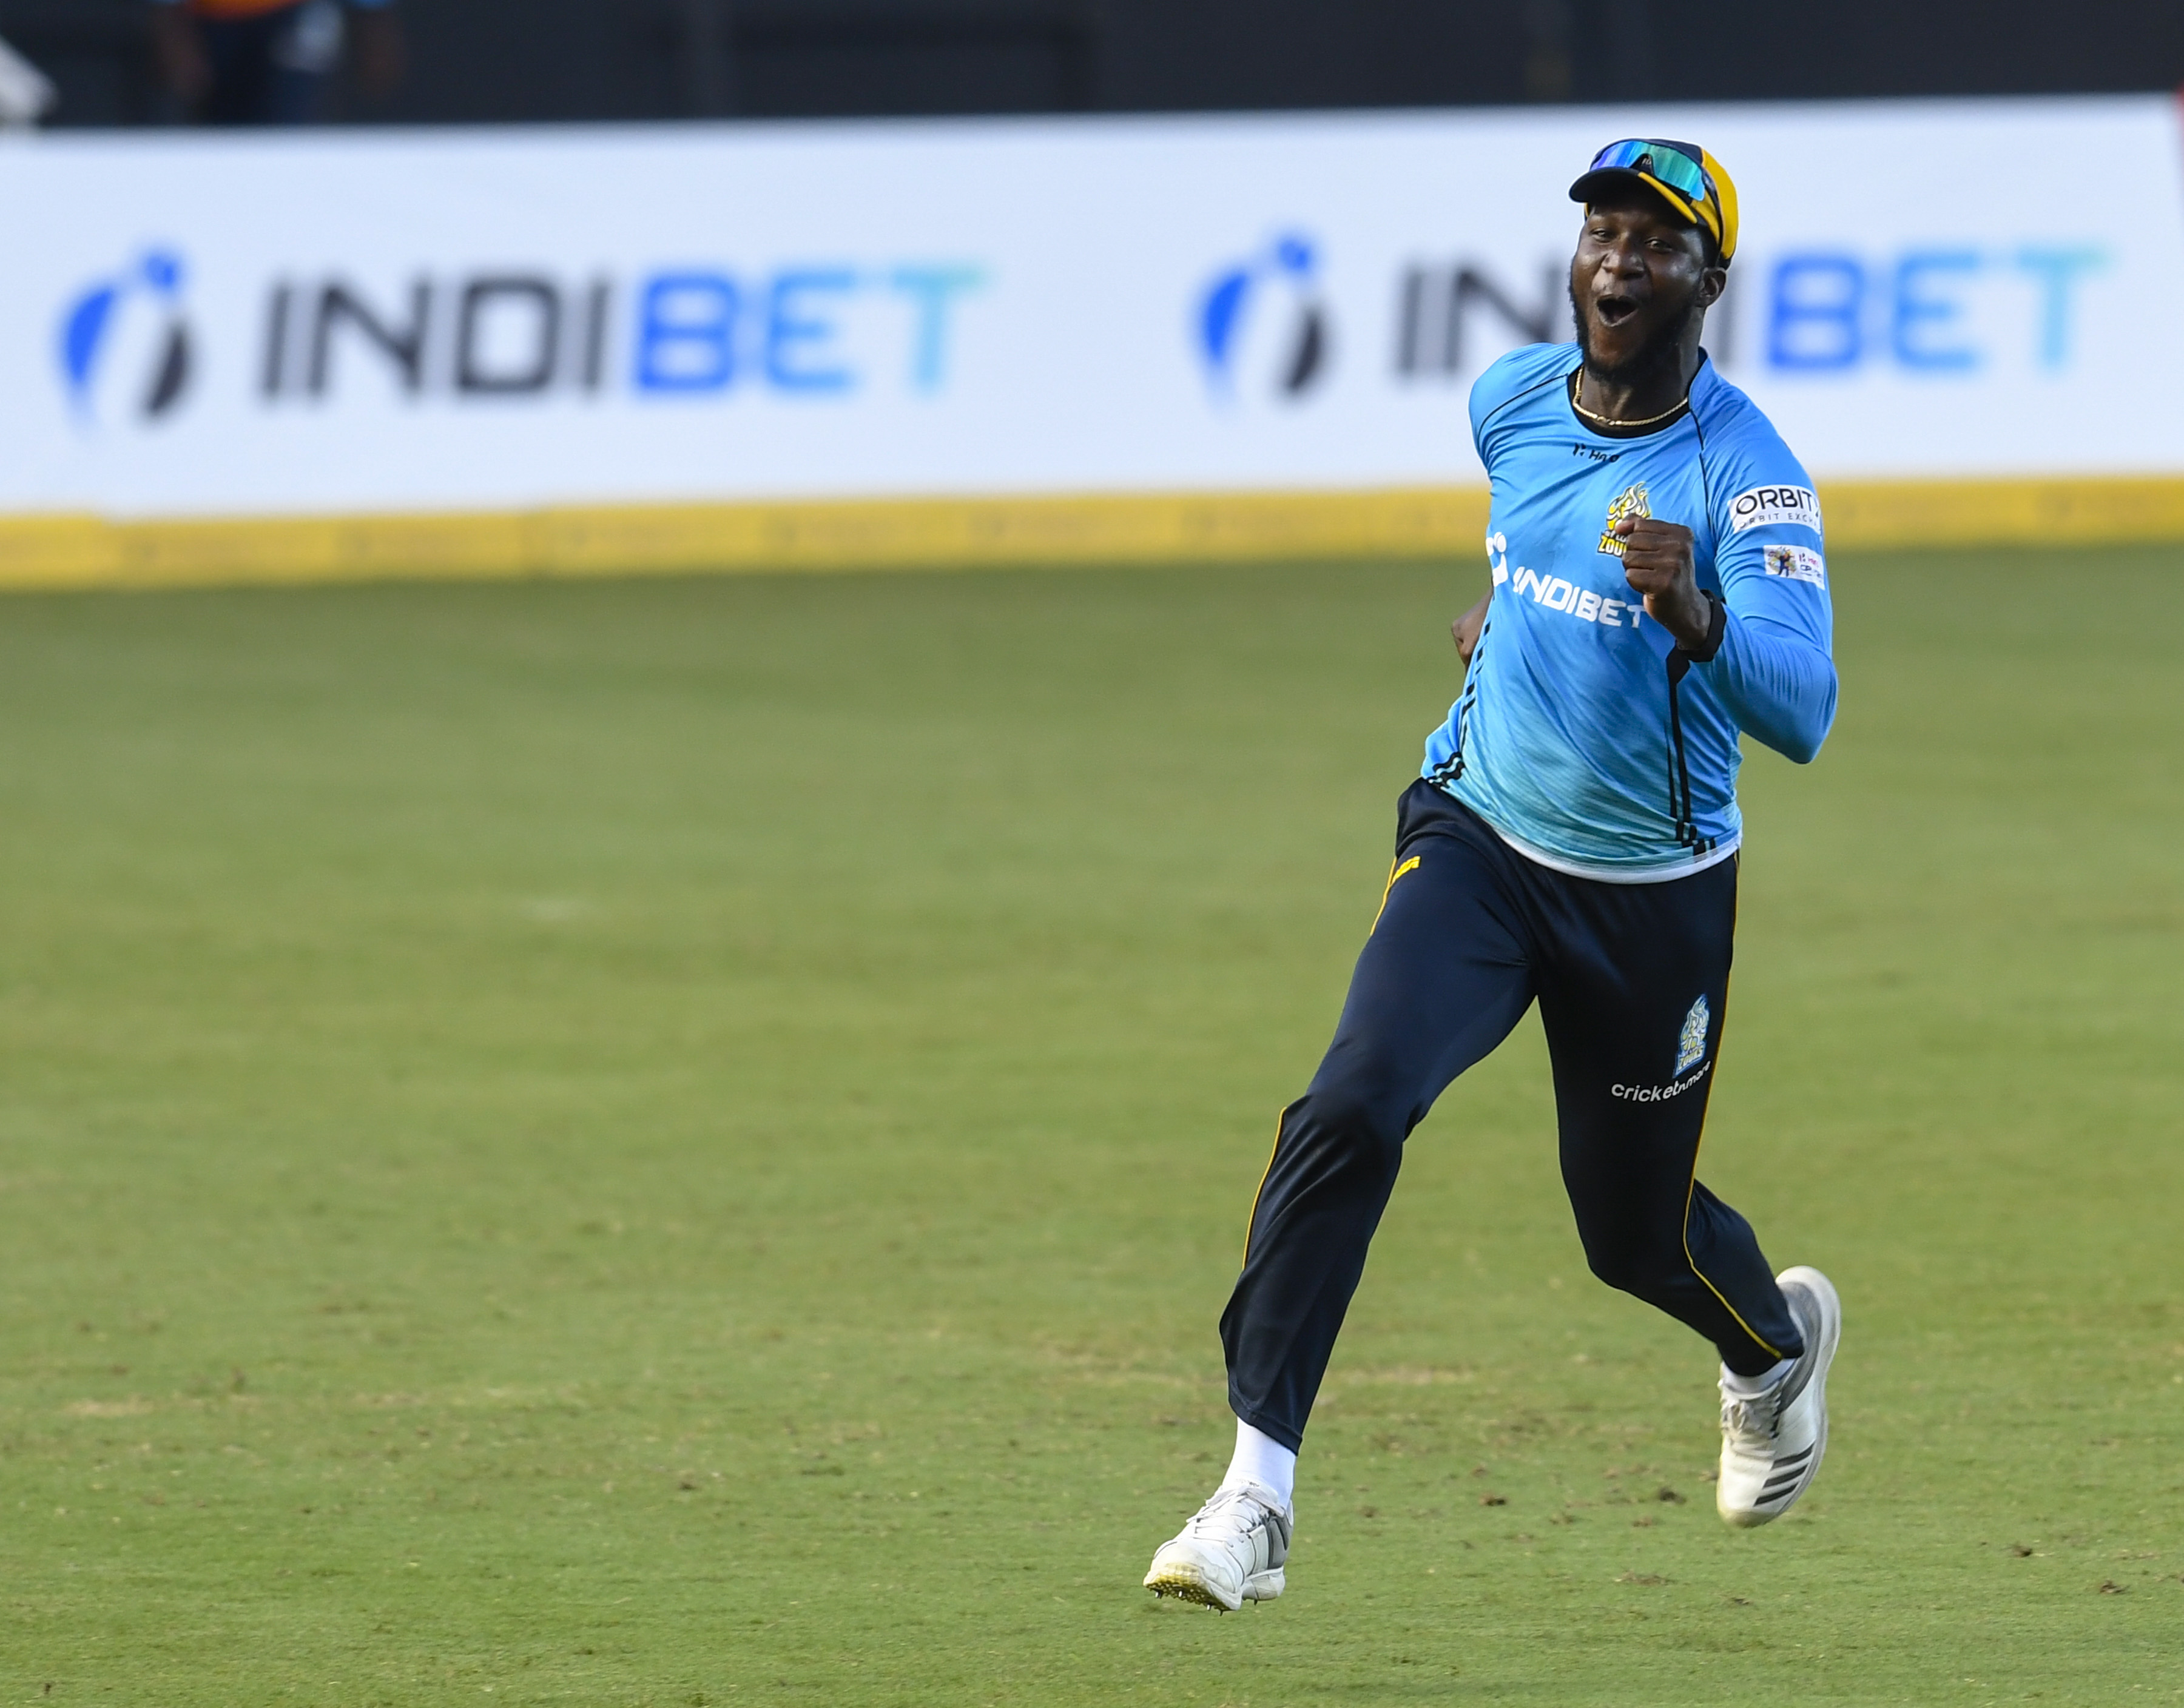 CPL 2020 | The INDIBET Zouks’ way from being underdogs to semi-finalists